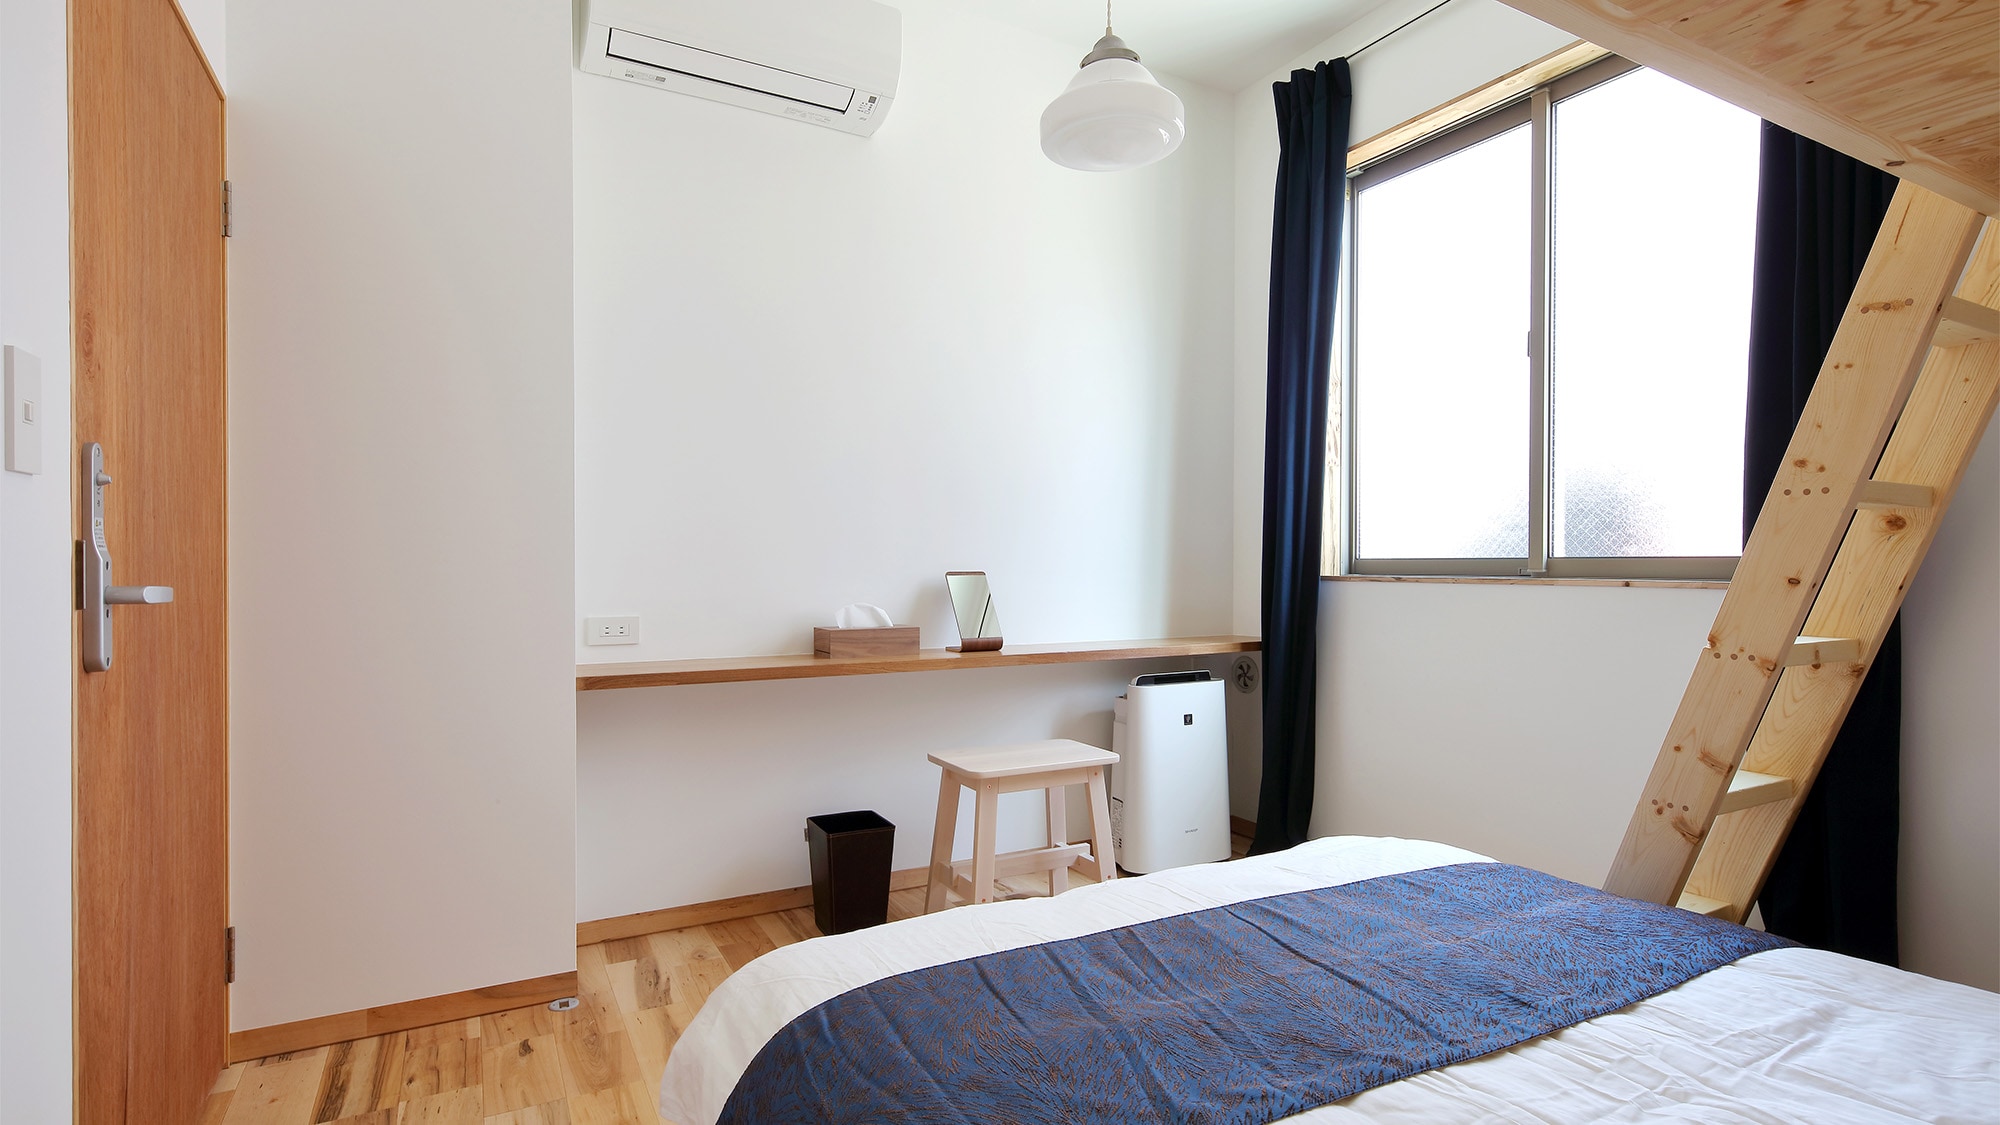 ・ [Double room with loft] 1 double bed and 1 single bed